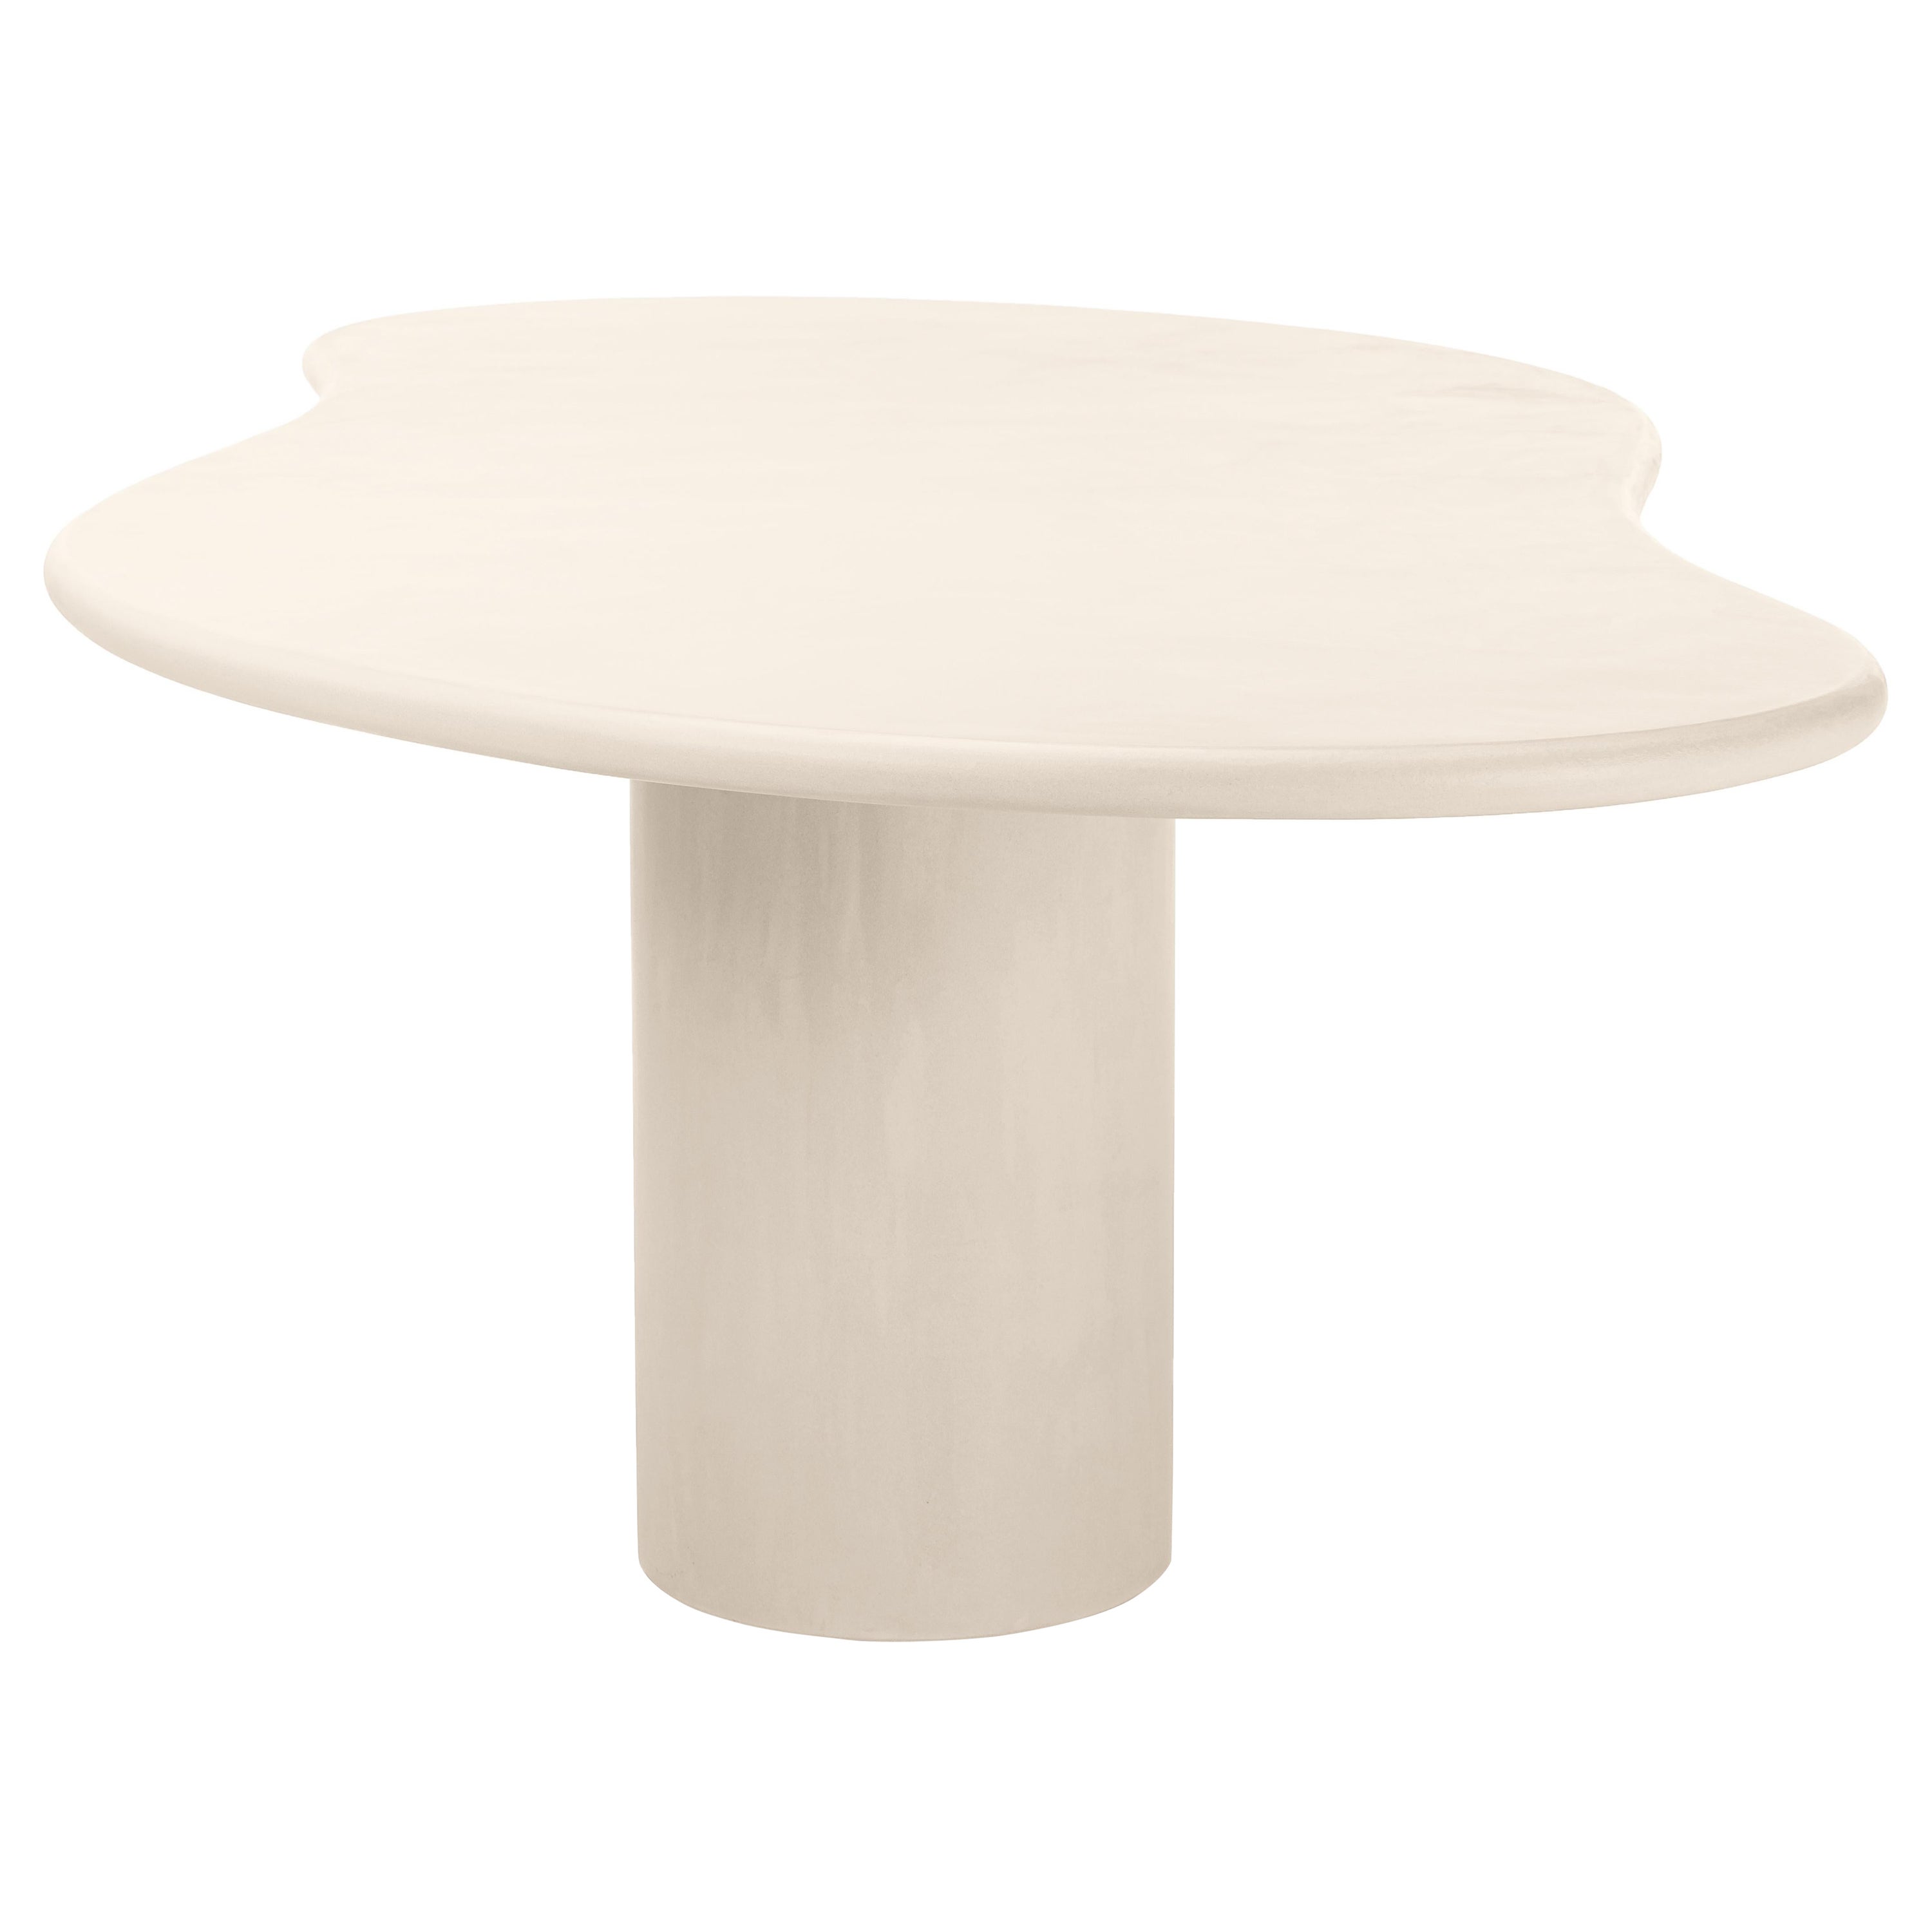 Contemporary Organic Natural Plaster "Latus" Table 320cm by Isabelle Beaumont